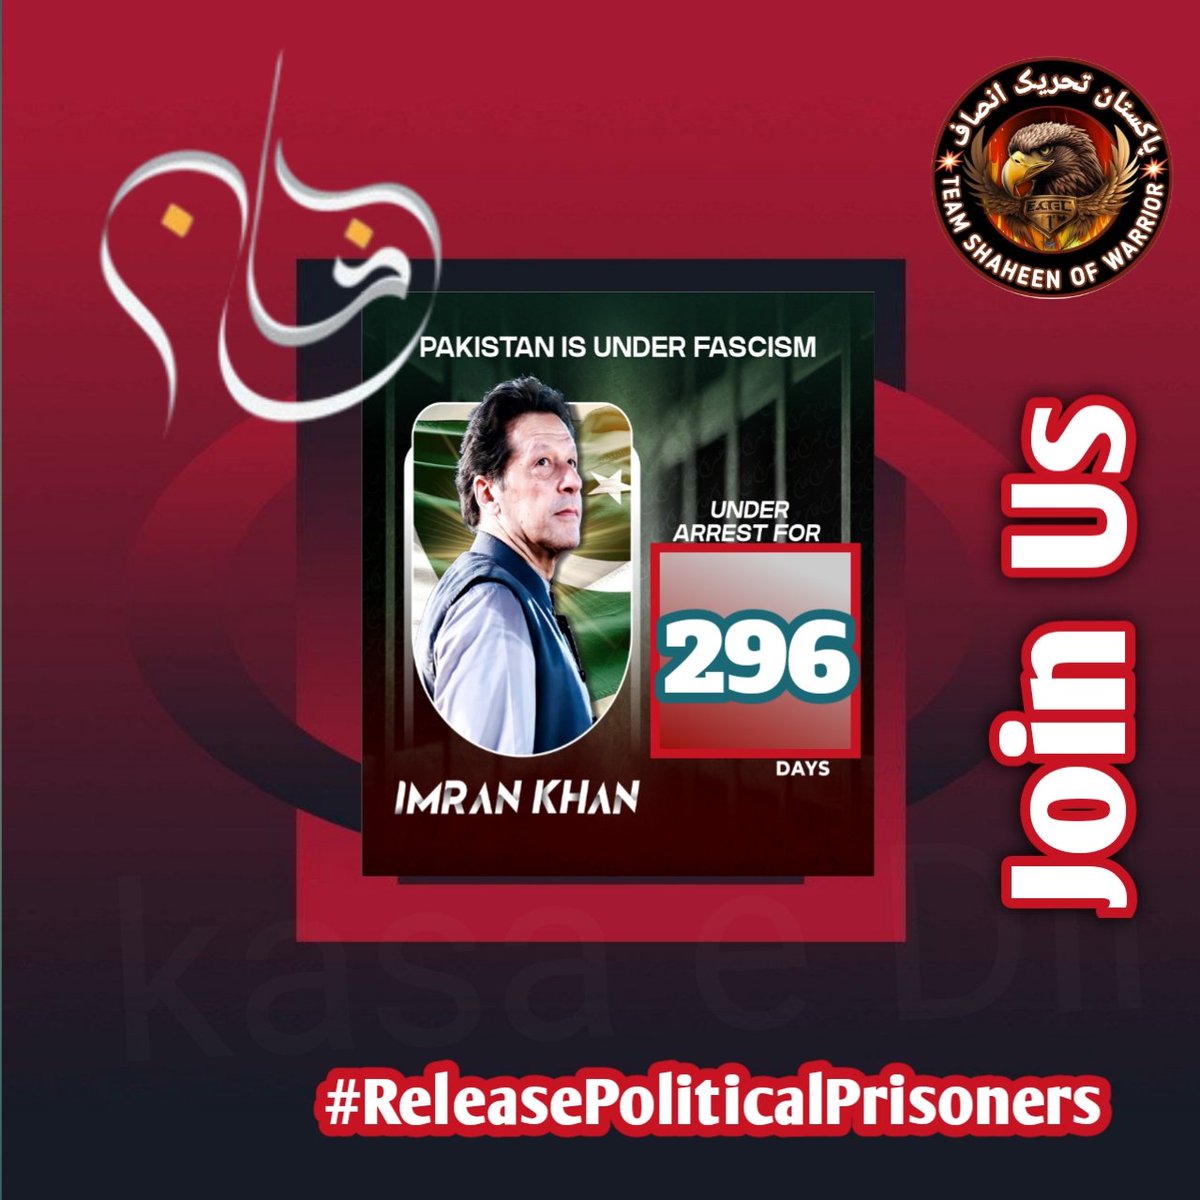 Political prisoners deserve freedom, not imprisonment. Demand their release from Army jails now. JusticeForAll 
#ReleasePoliticalPrisoners 
@TM__SOW